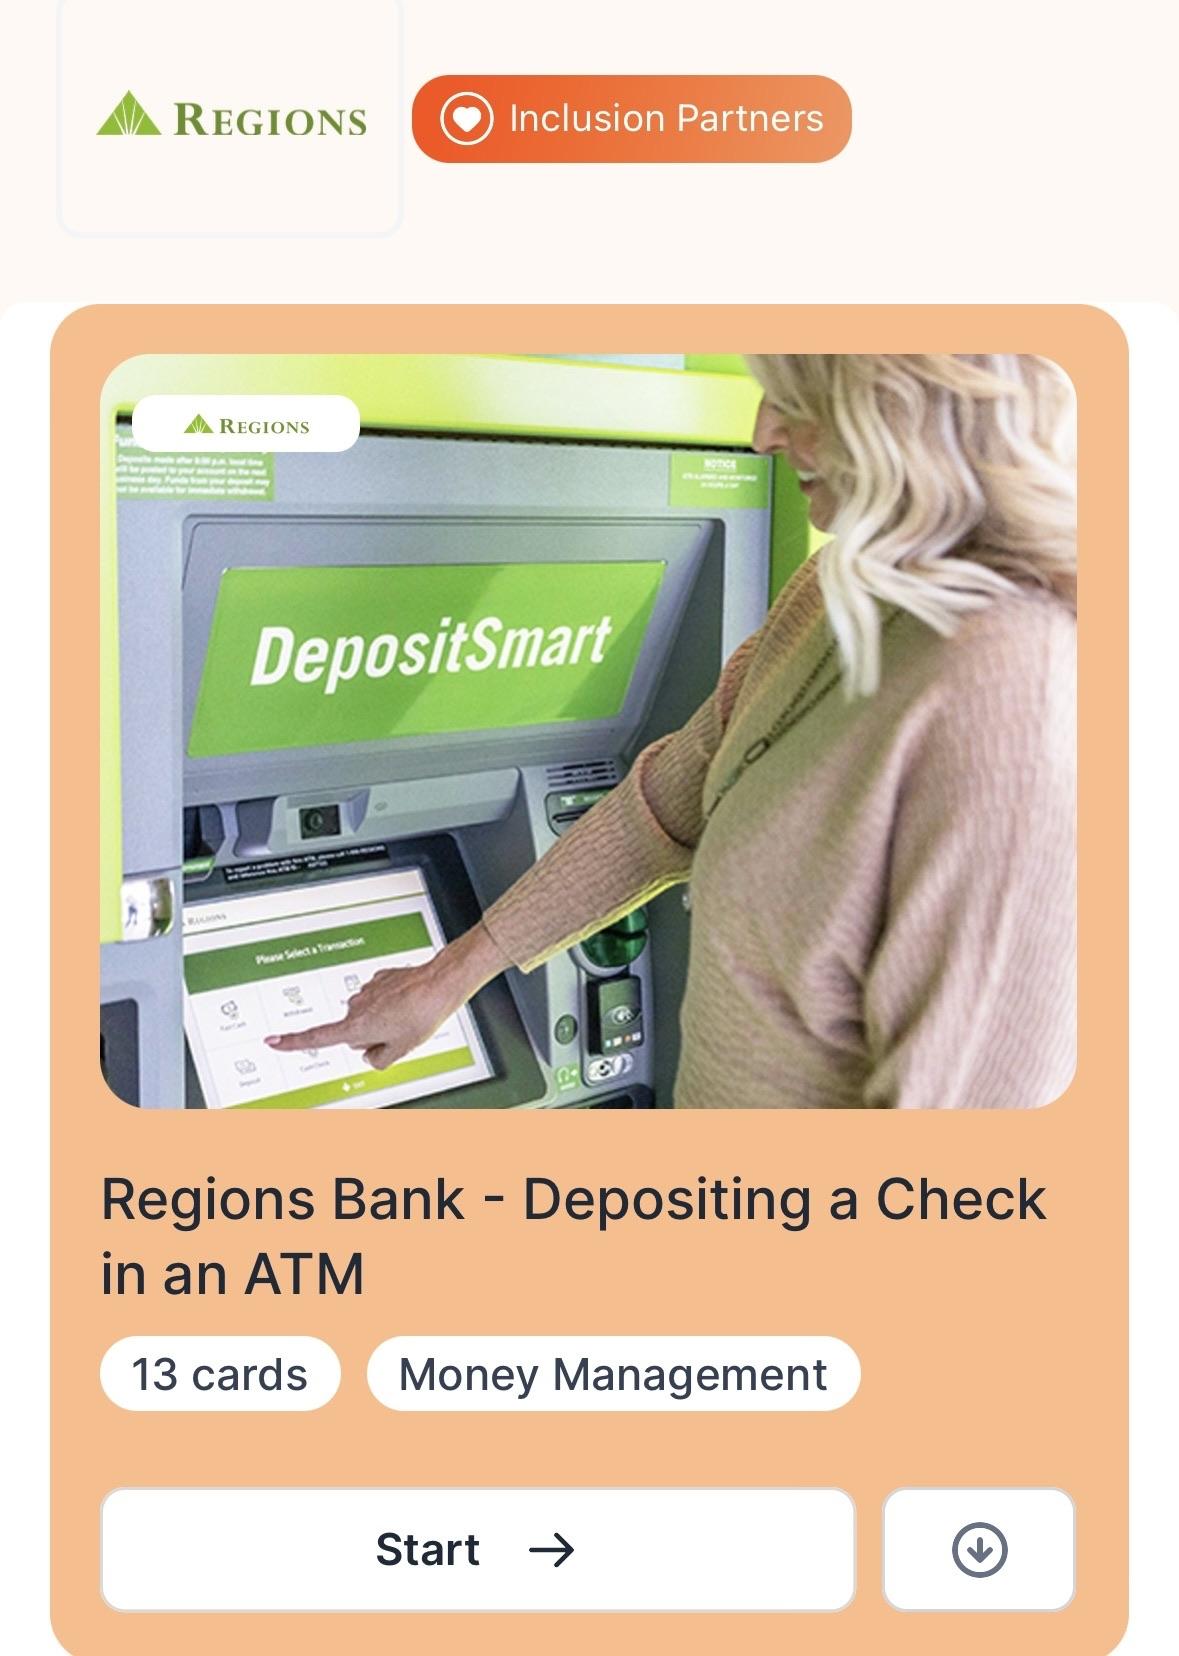 A person depositing a check in an ATM